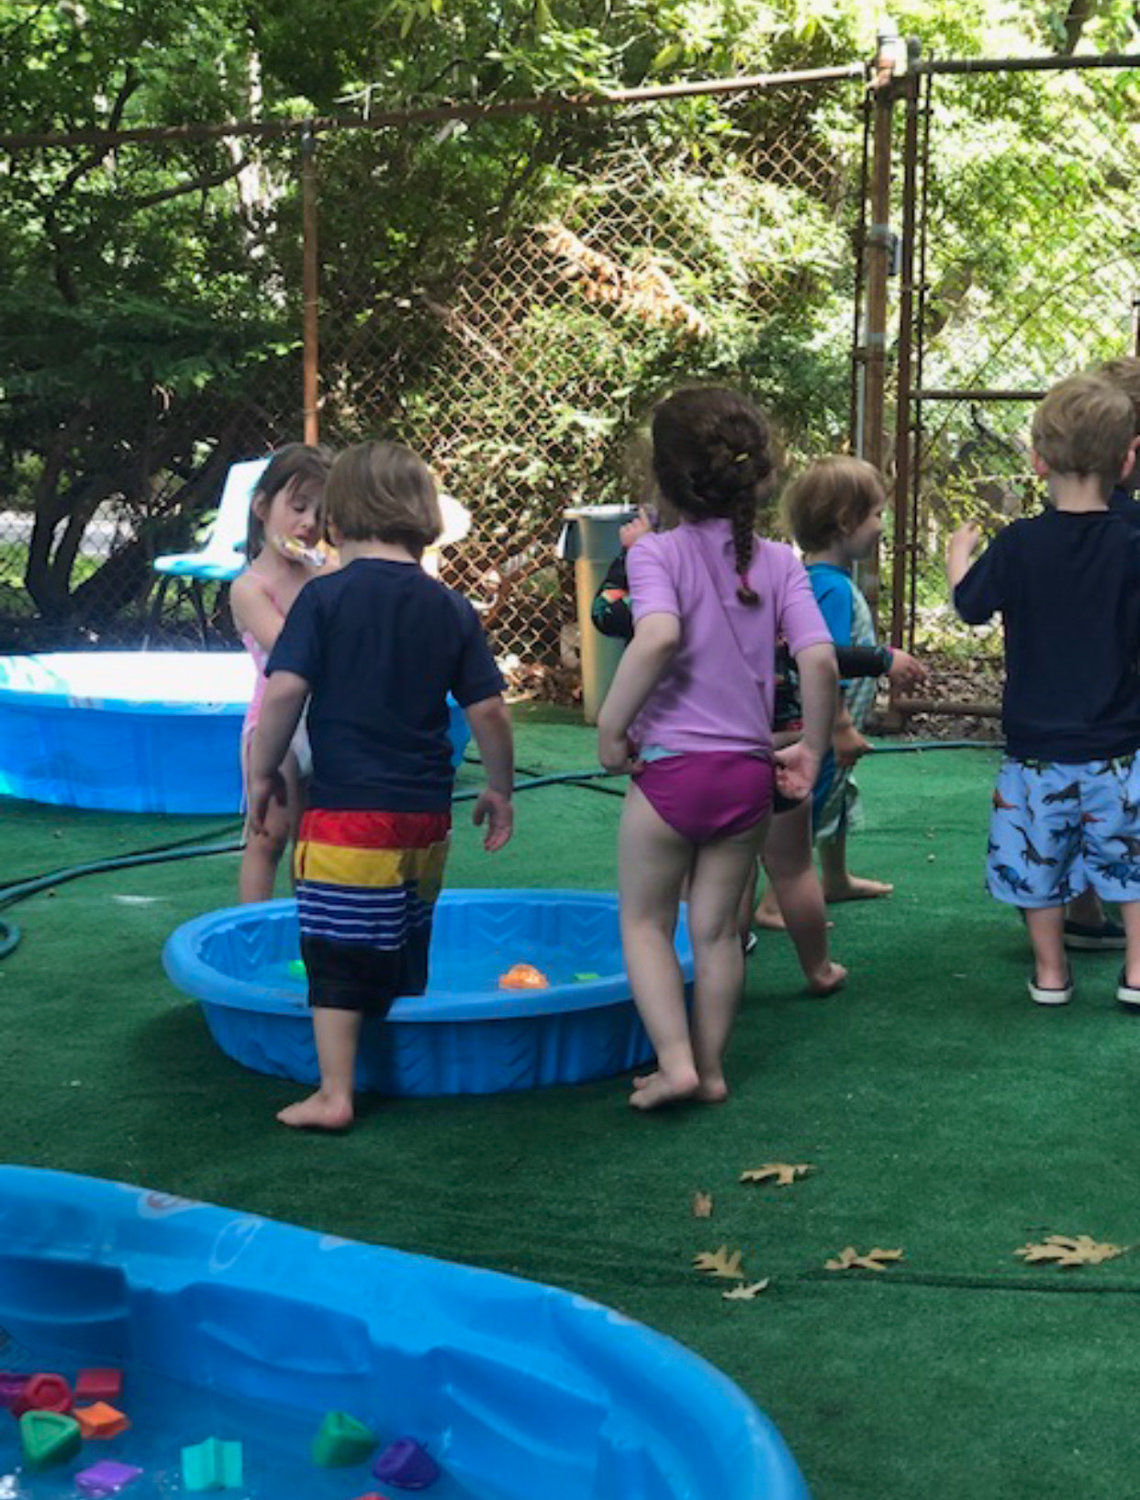 In past summers, campers at Riverdale Temple could cool off in outdoor pools. With the ongoing coronavirus pandemic, however, camp coordinators are unsure if they will be able to offer their usual summer programs.